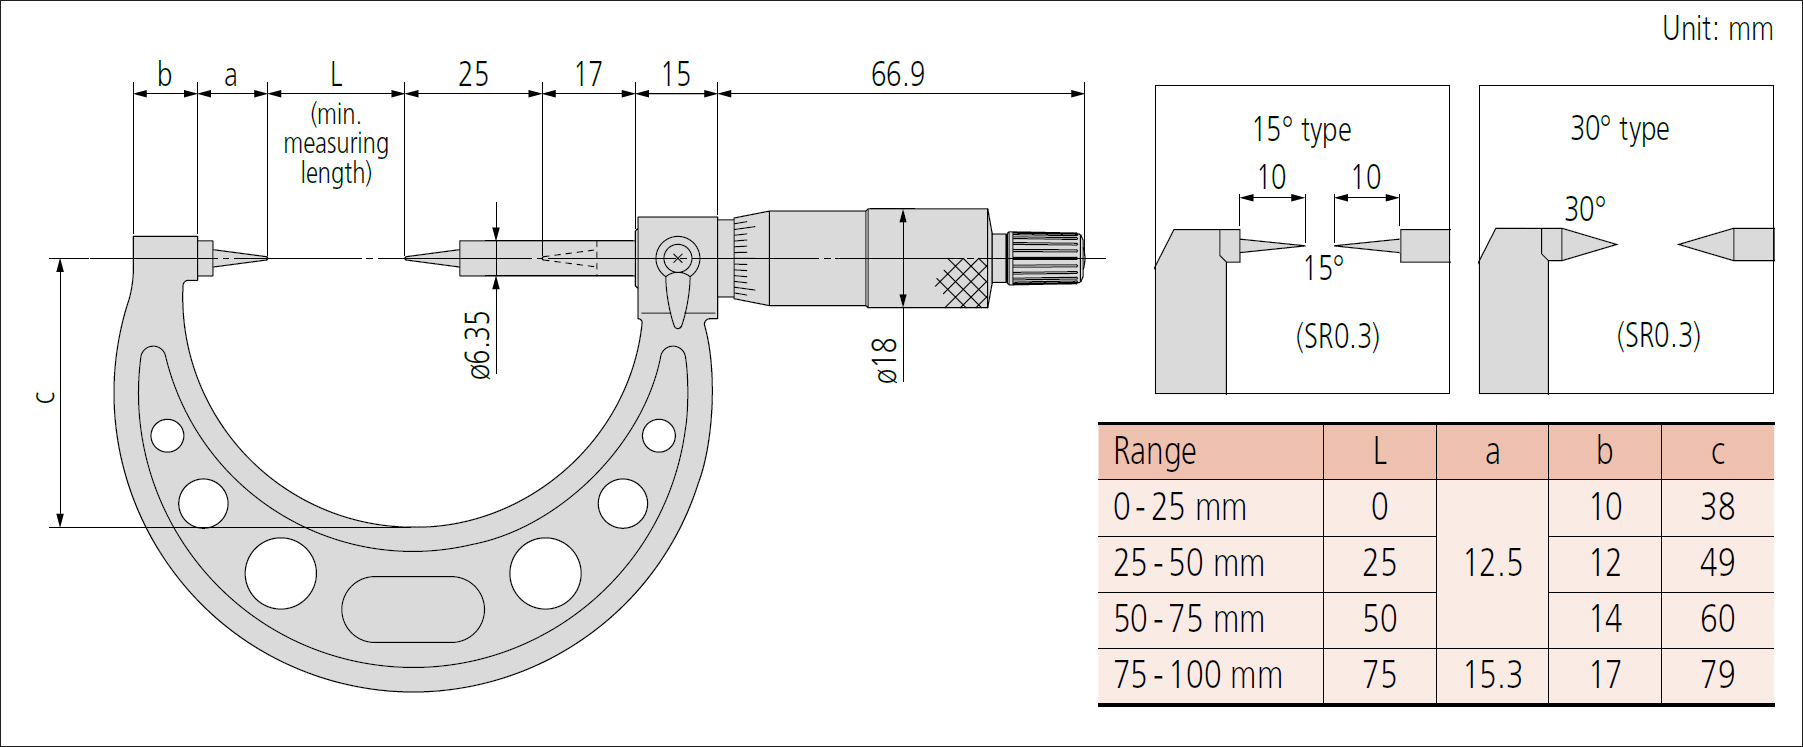 Mitutoyo 112 point micrometer dimensions.